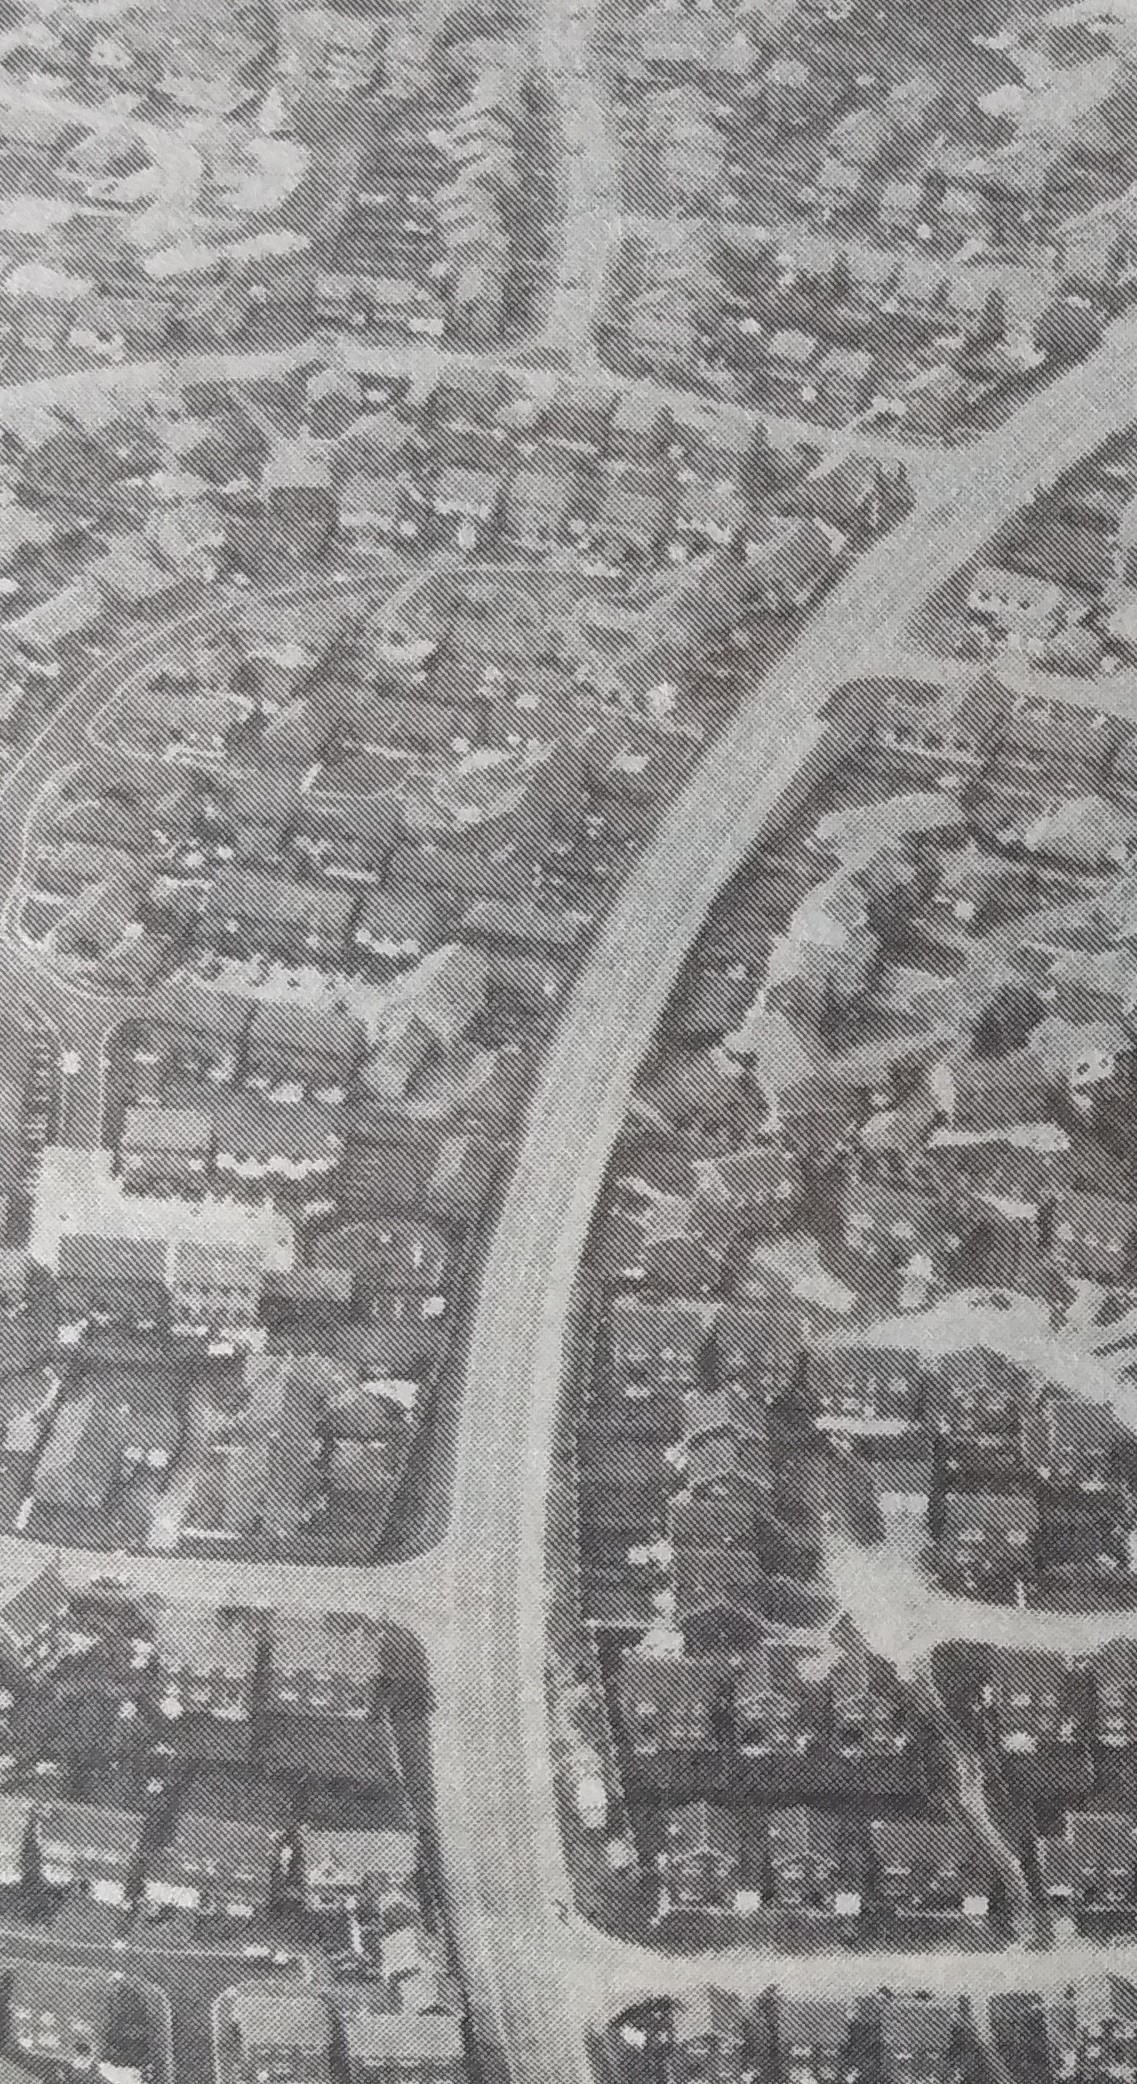 This birds-eye view taken by Roy Booker in 1989 show the recognisable line of St Peters Drive as it arcs westward towards the junstion with the Bath Road